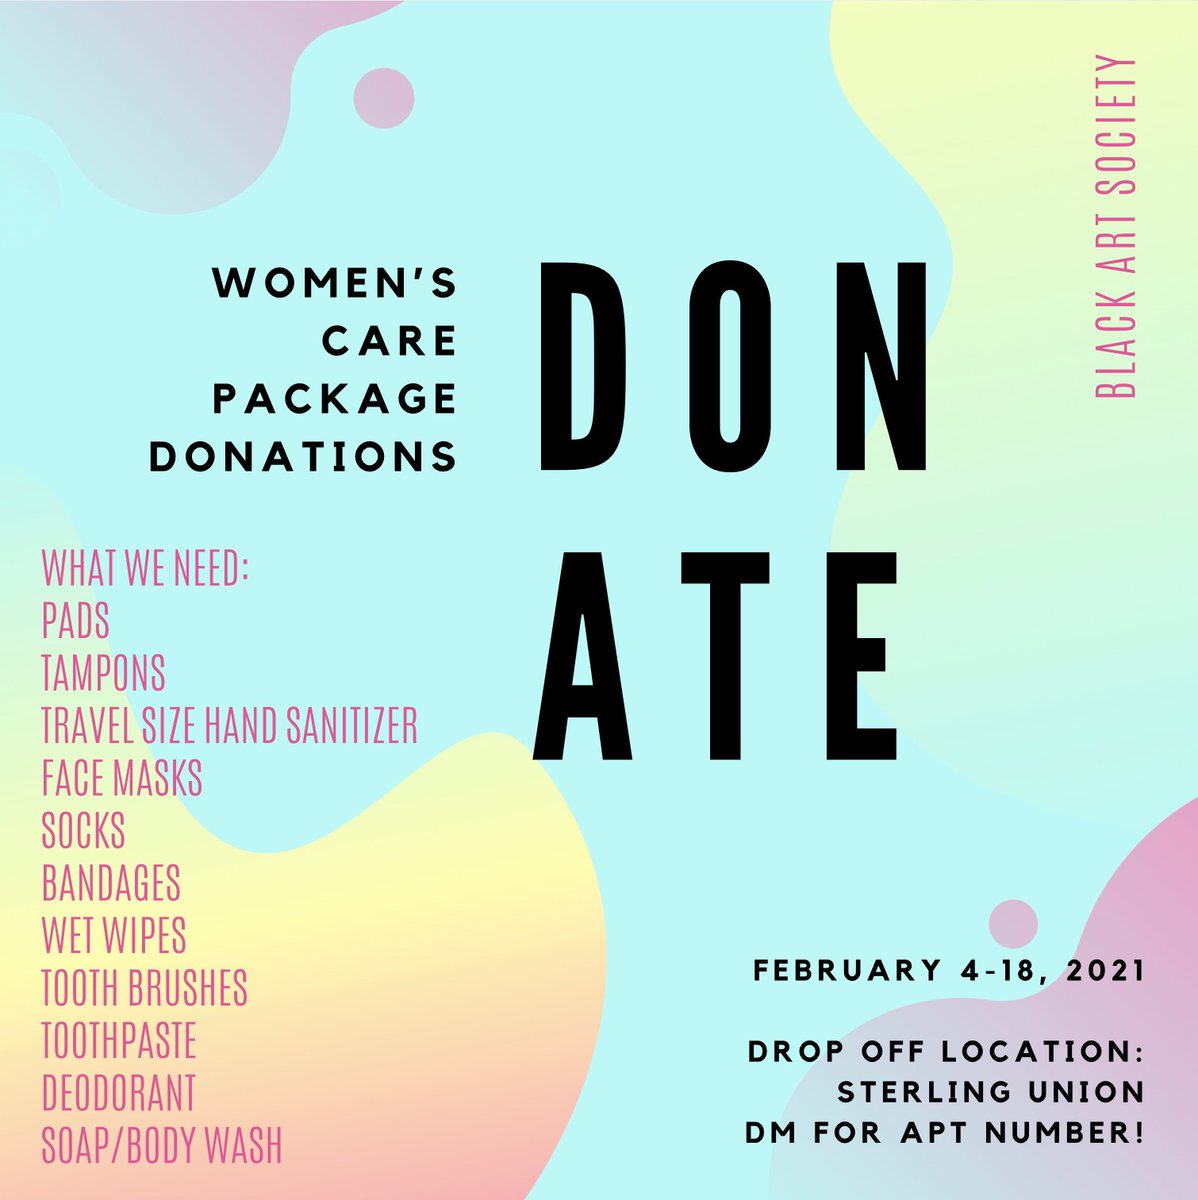 Hey guys do miss out of this!!! We are donating women goods please DM me for the address or @BlackArt_SHSU